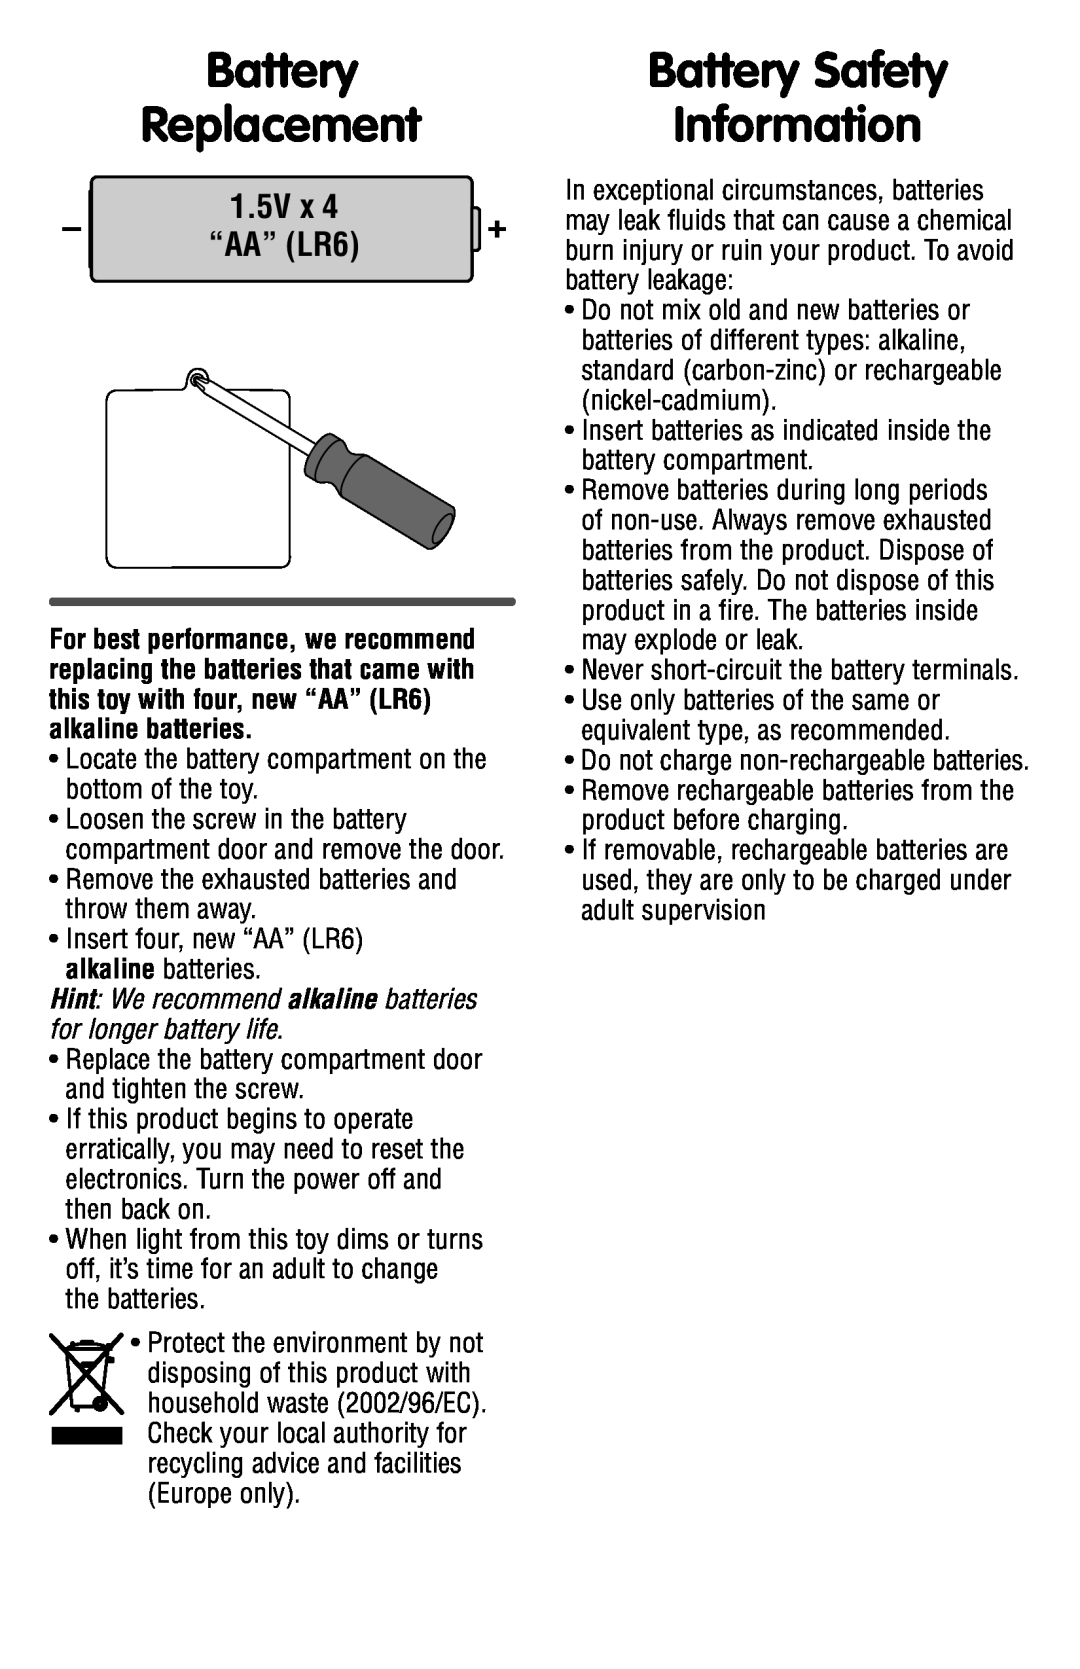 Fisher-Price R3931 manual Battery Replacement, Battery Safety Information, 1.5V x “AA” LR6 